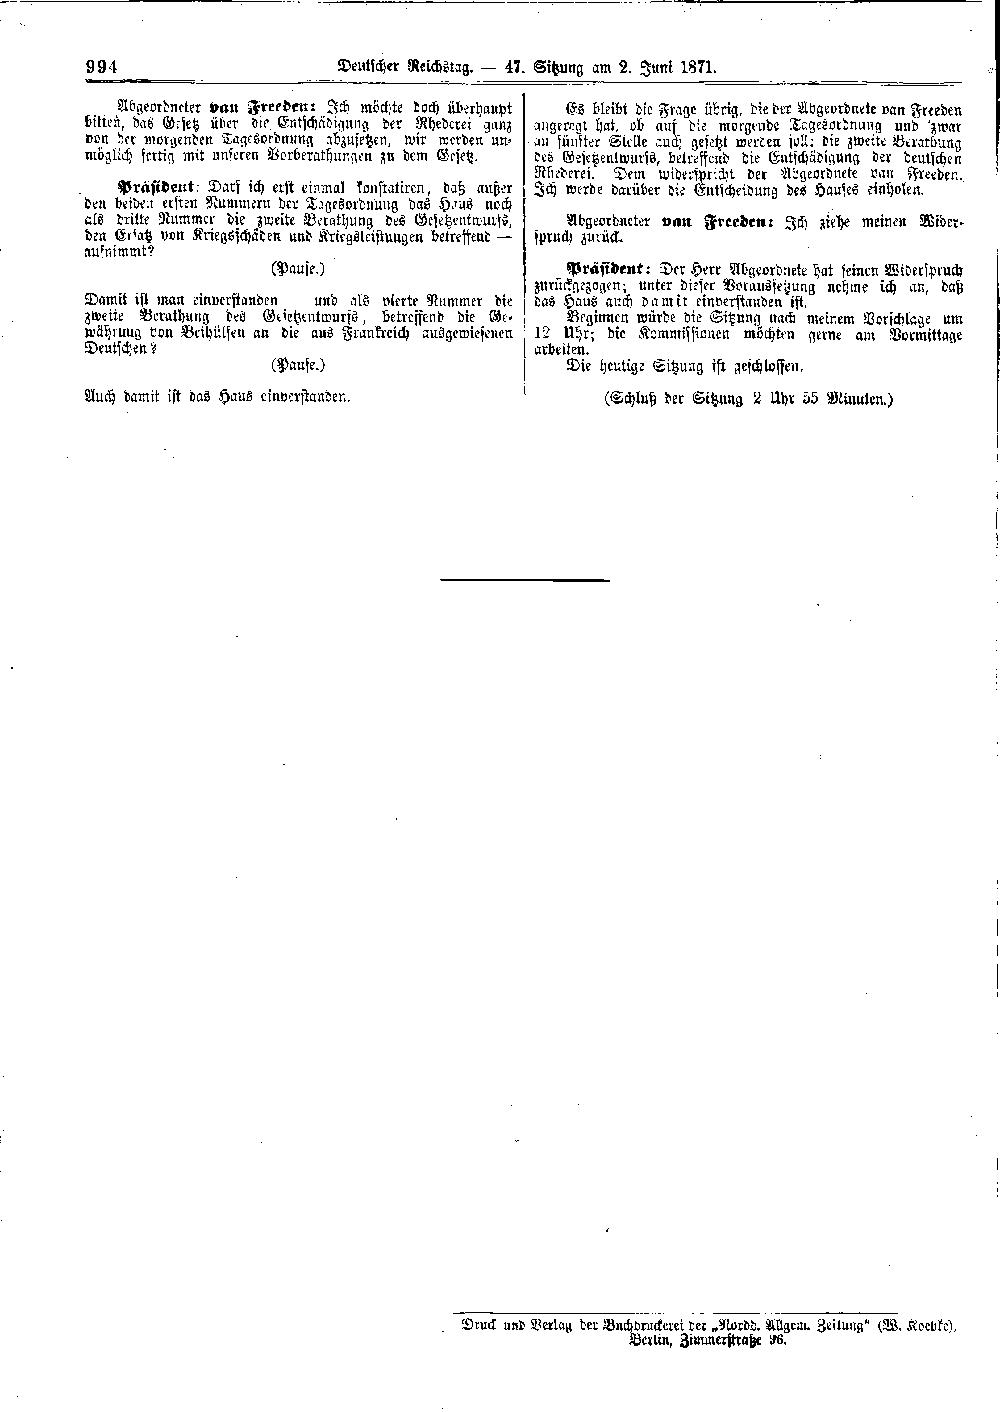 Scan of page 994